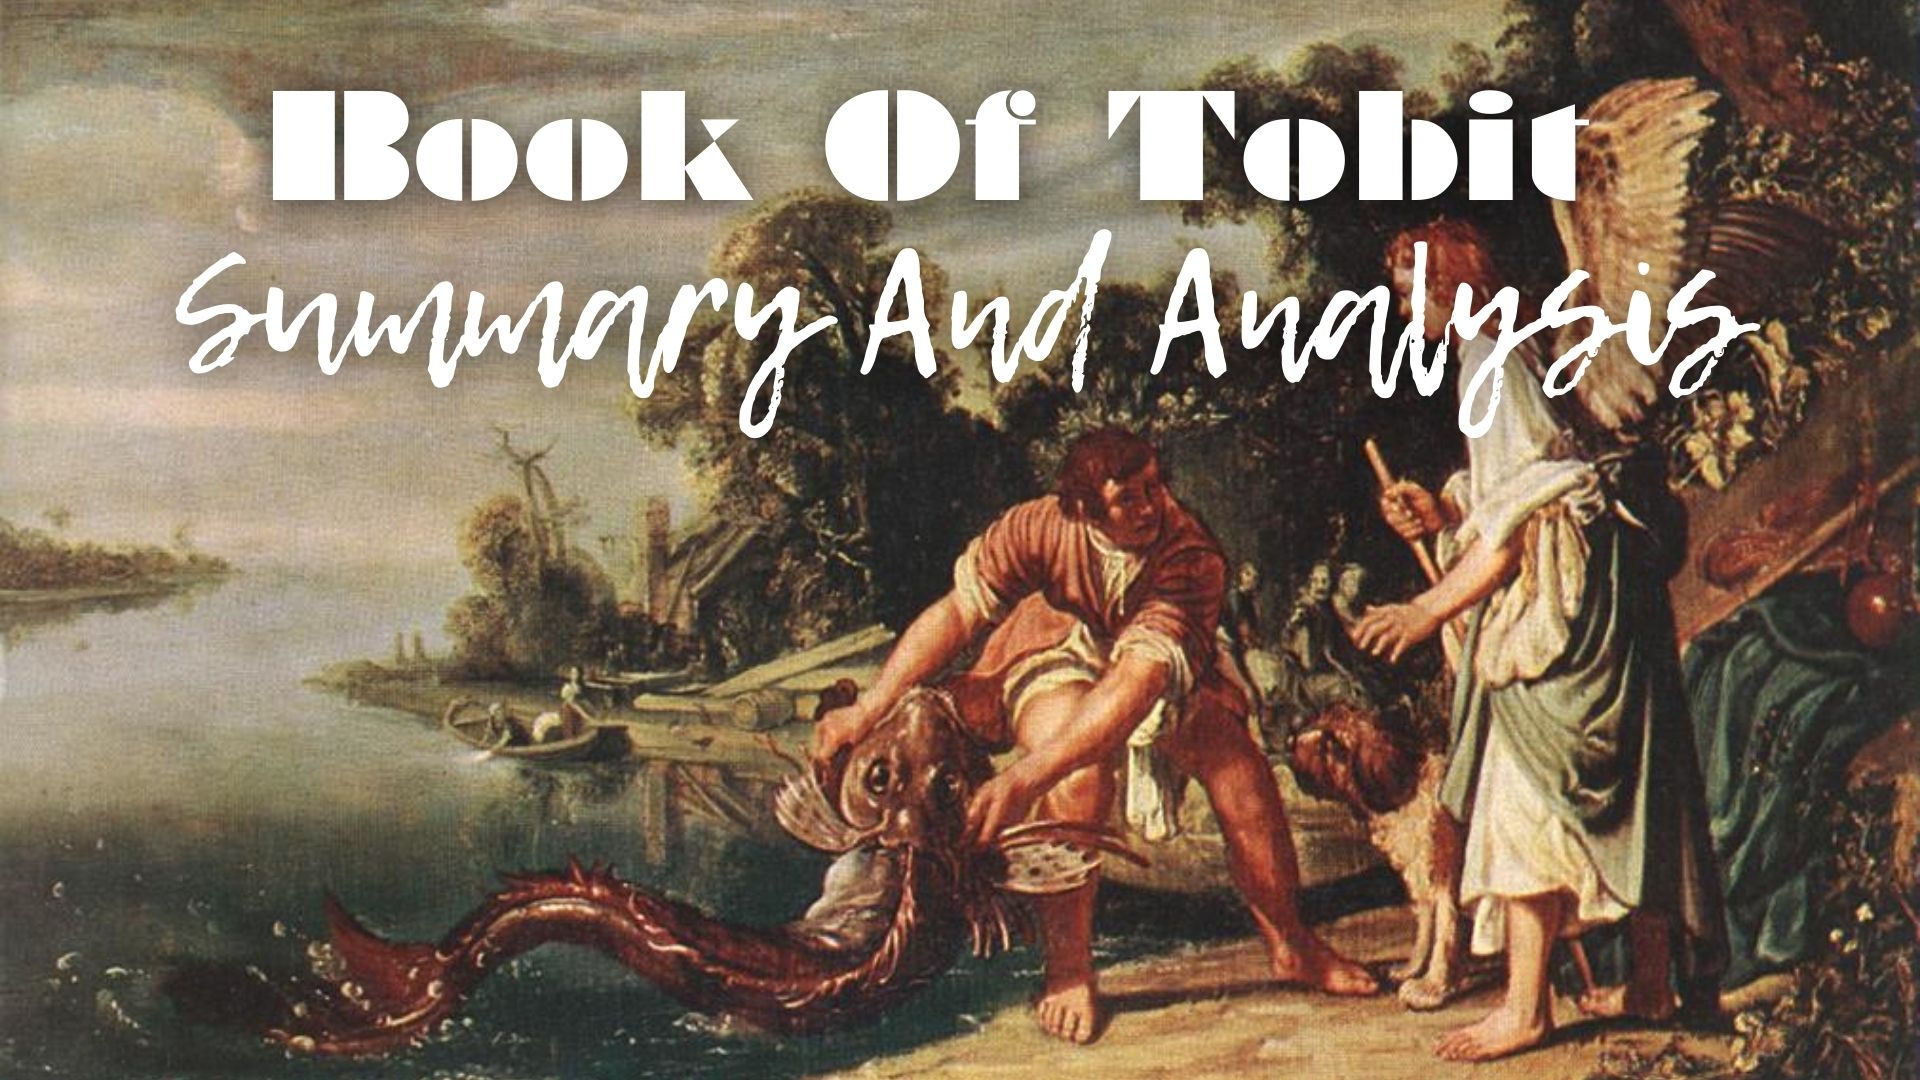 Book Of Tobit Summary And Analysis